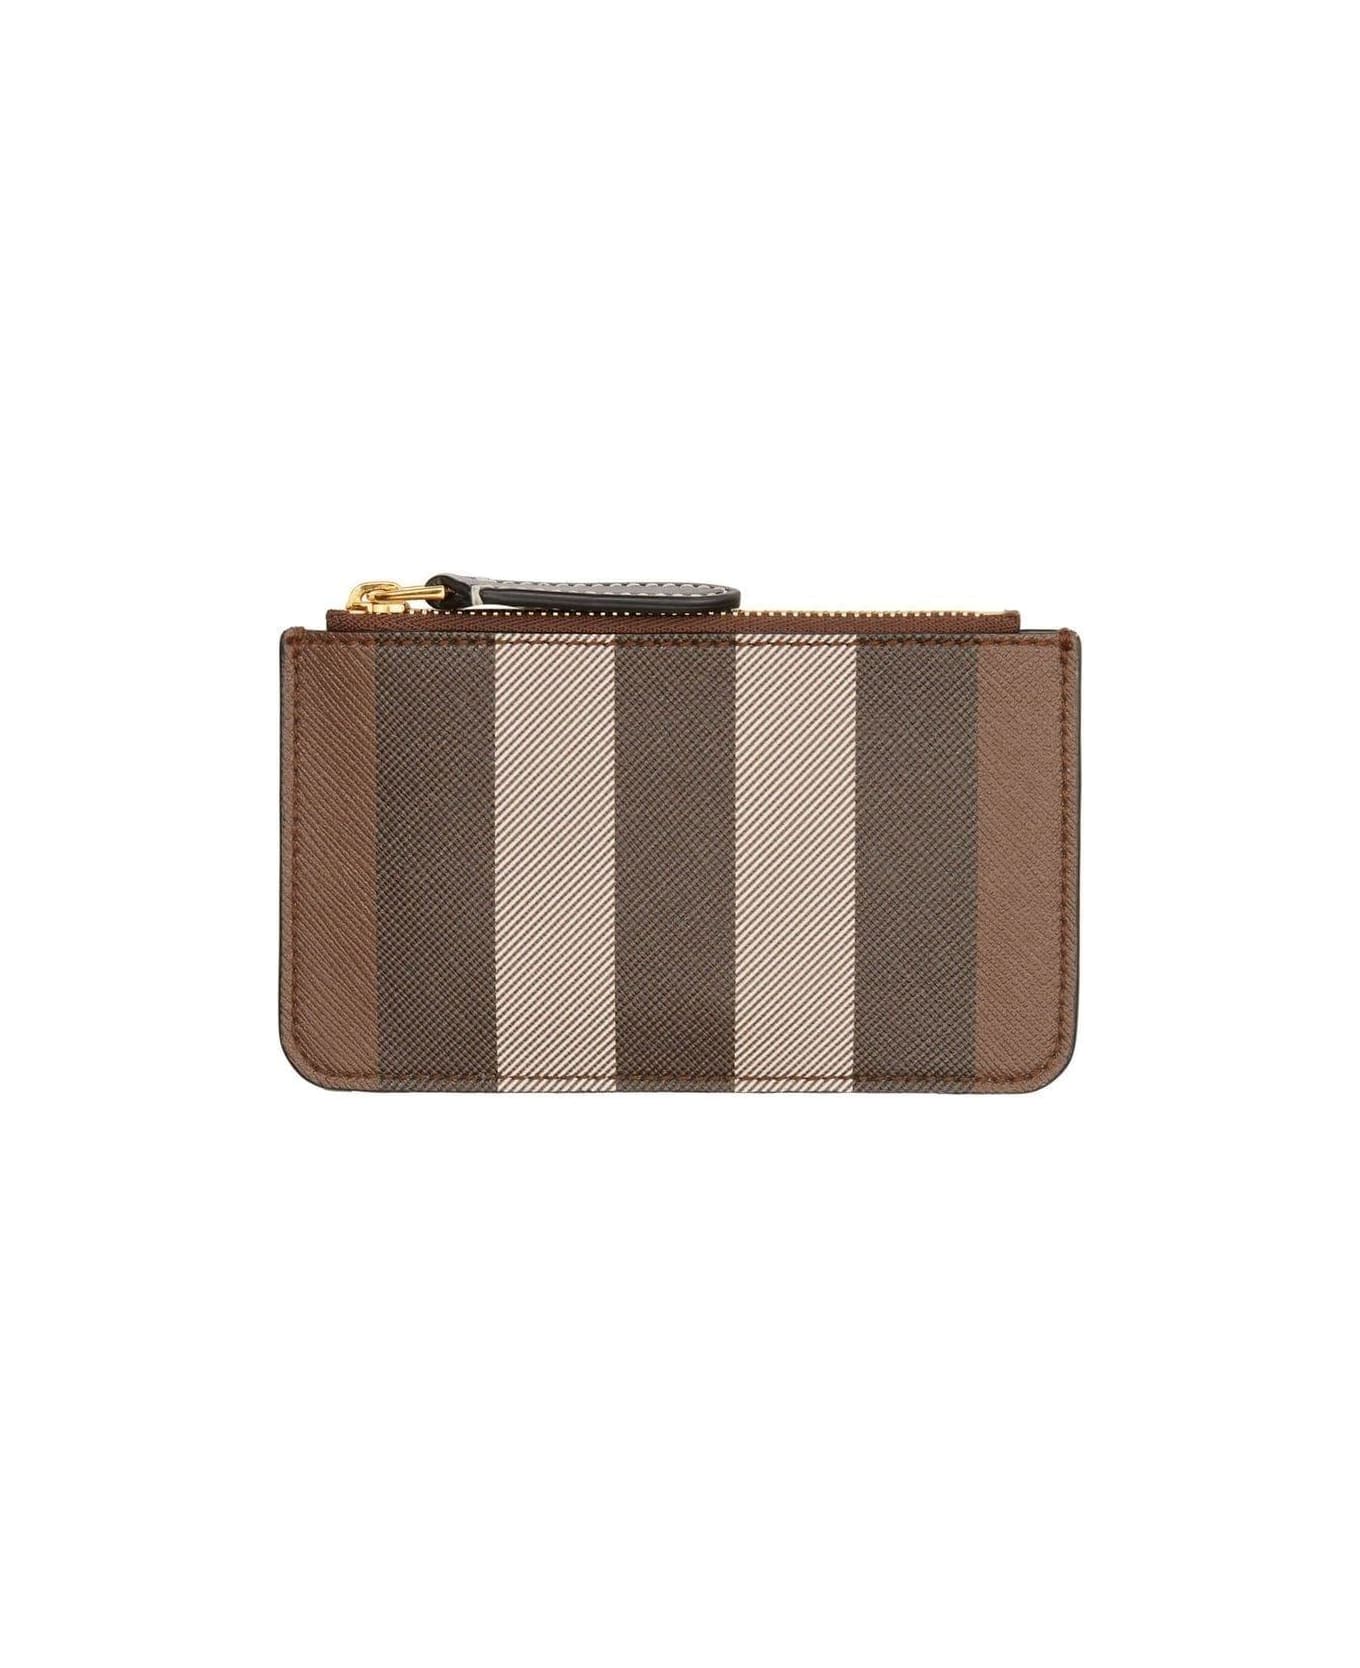 Burberry Striped Zipped Wallet - A8900